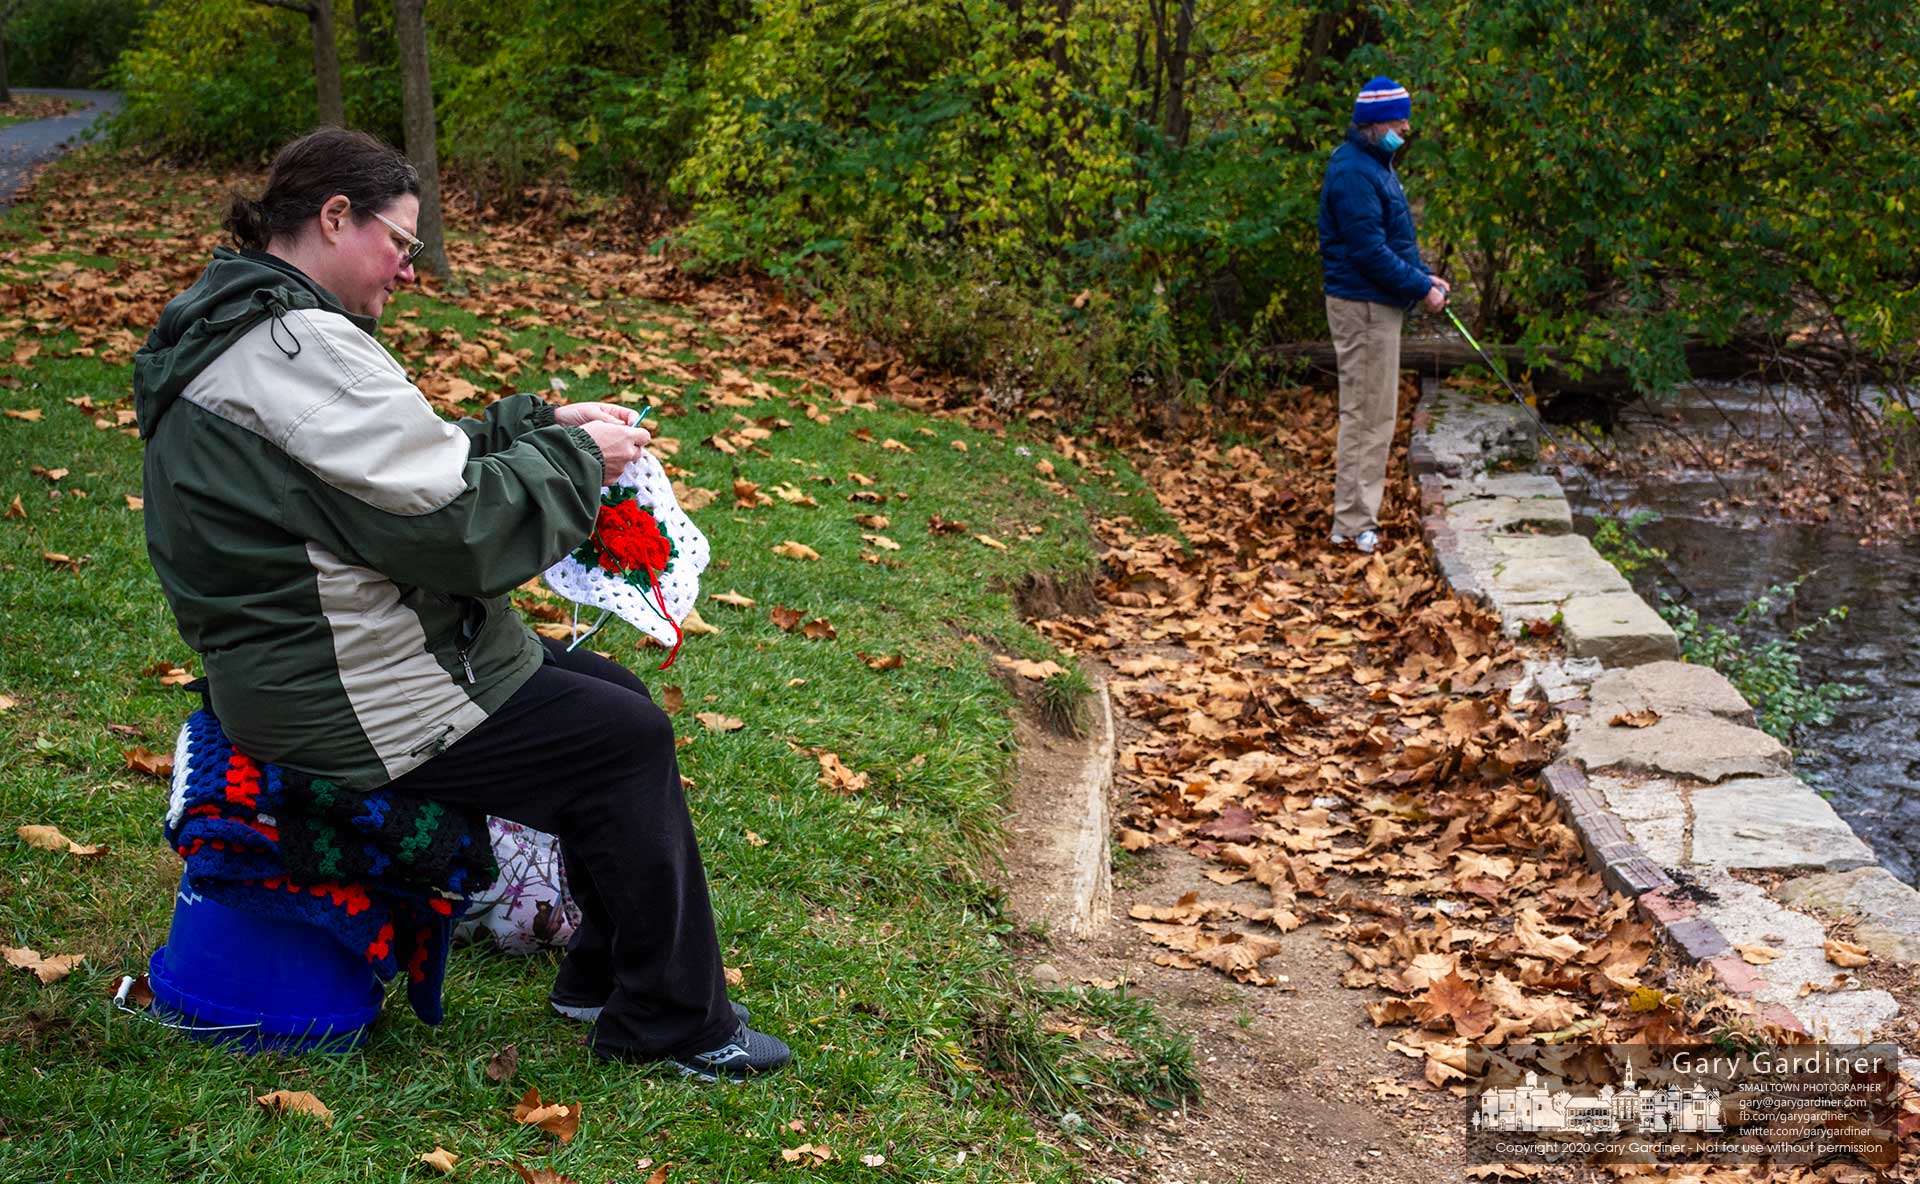 A woman crochets while her husband tries his luck and skill at fishing below the lowhead dam at Alum Creek Park North. My Final Photo for  Nov. 14, 2020.